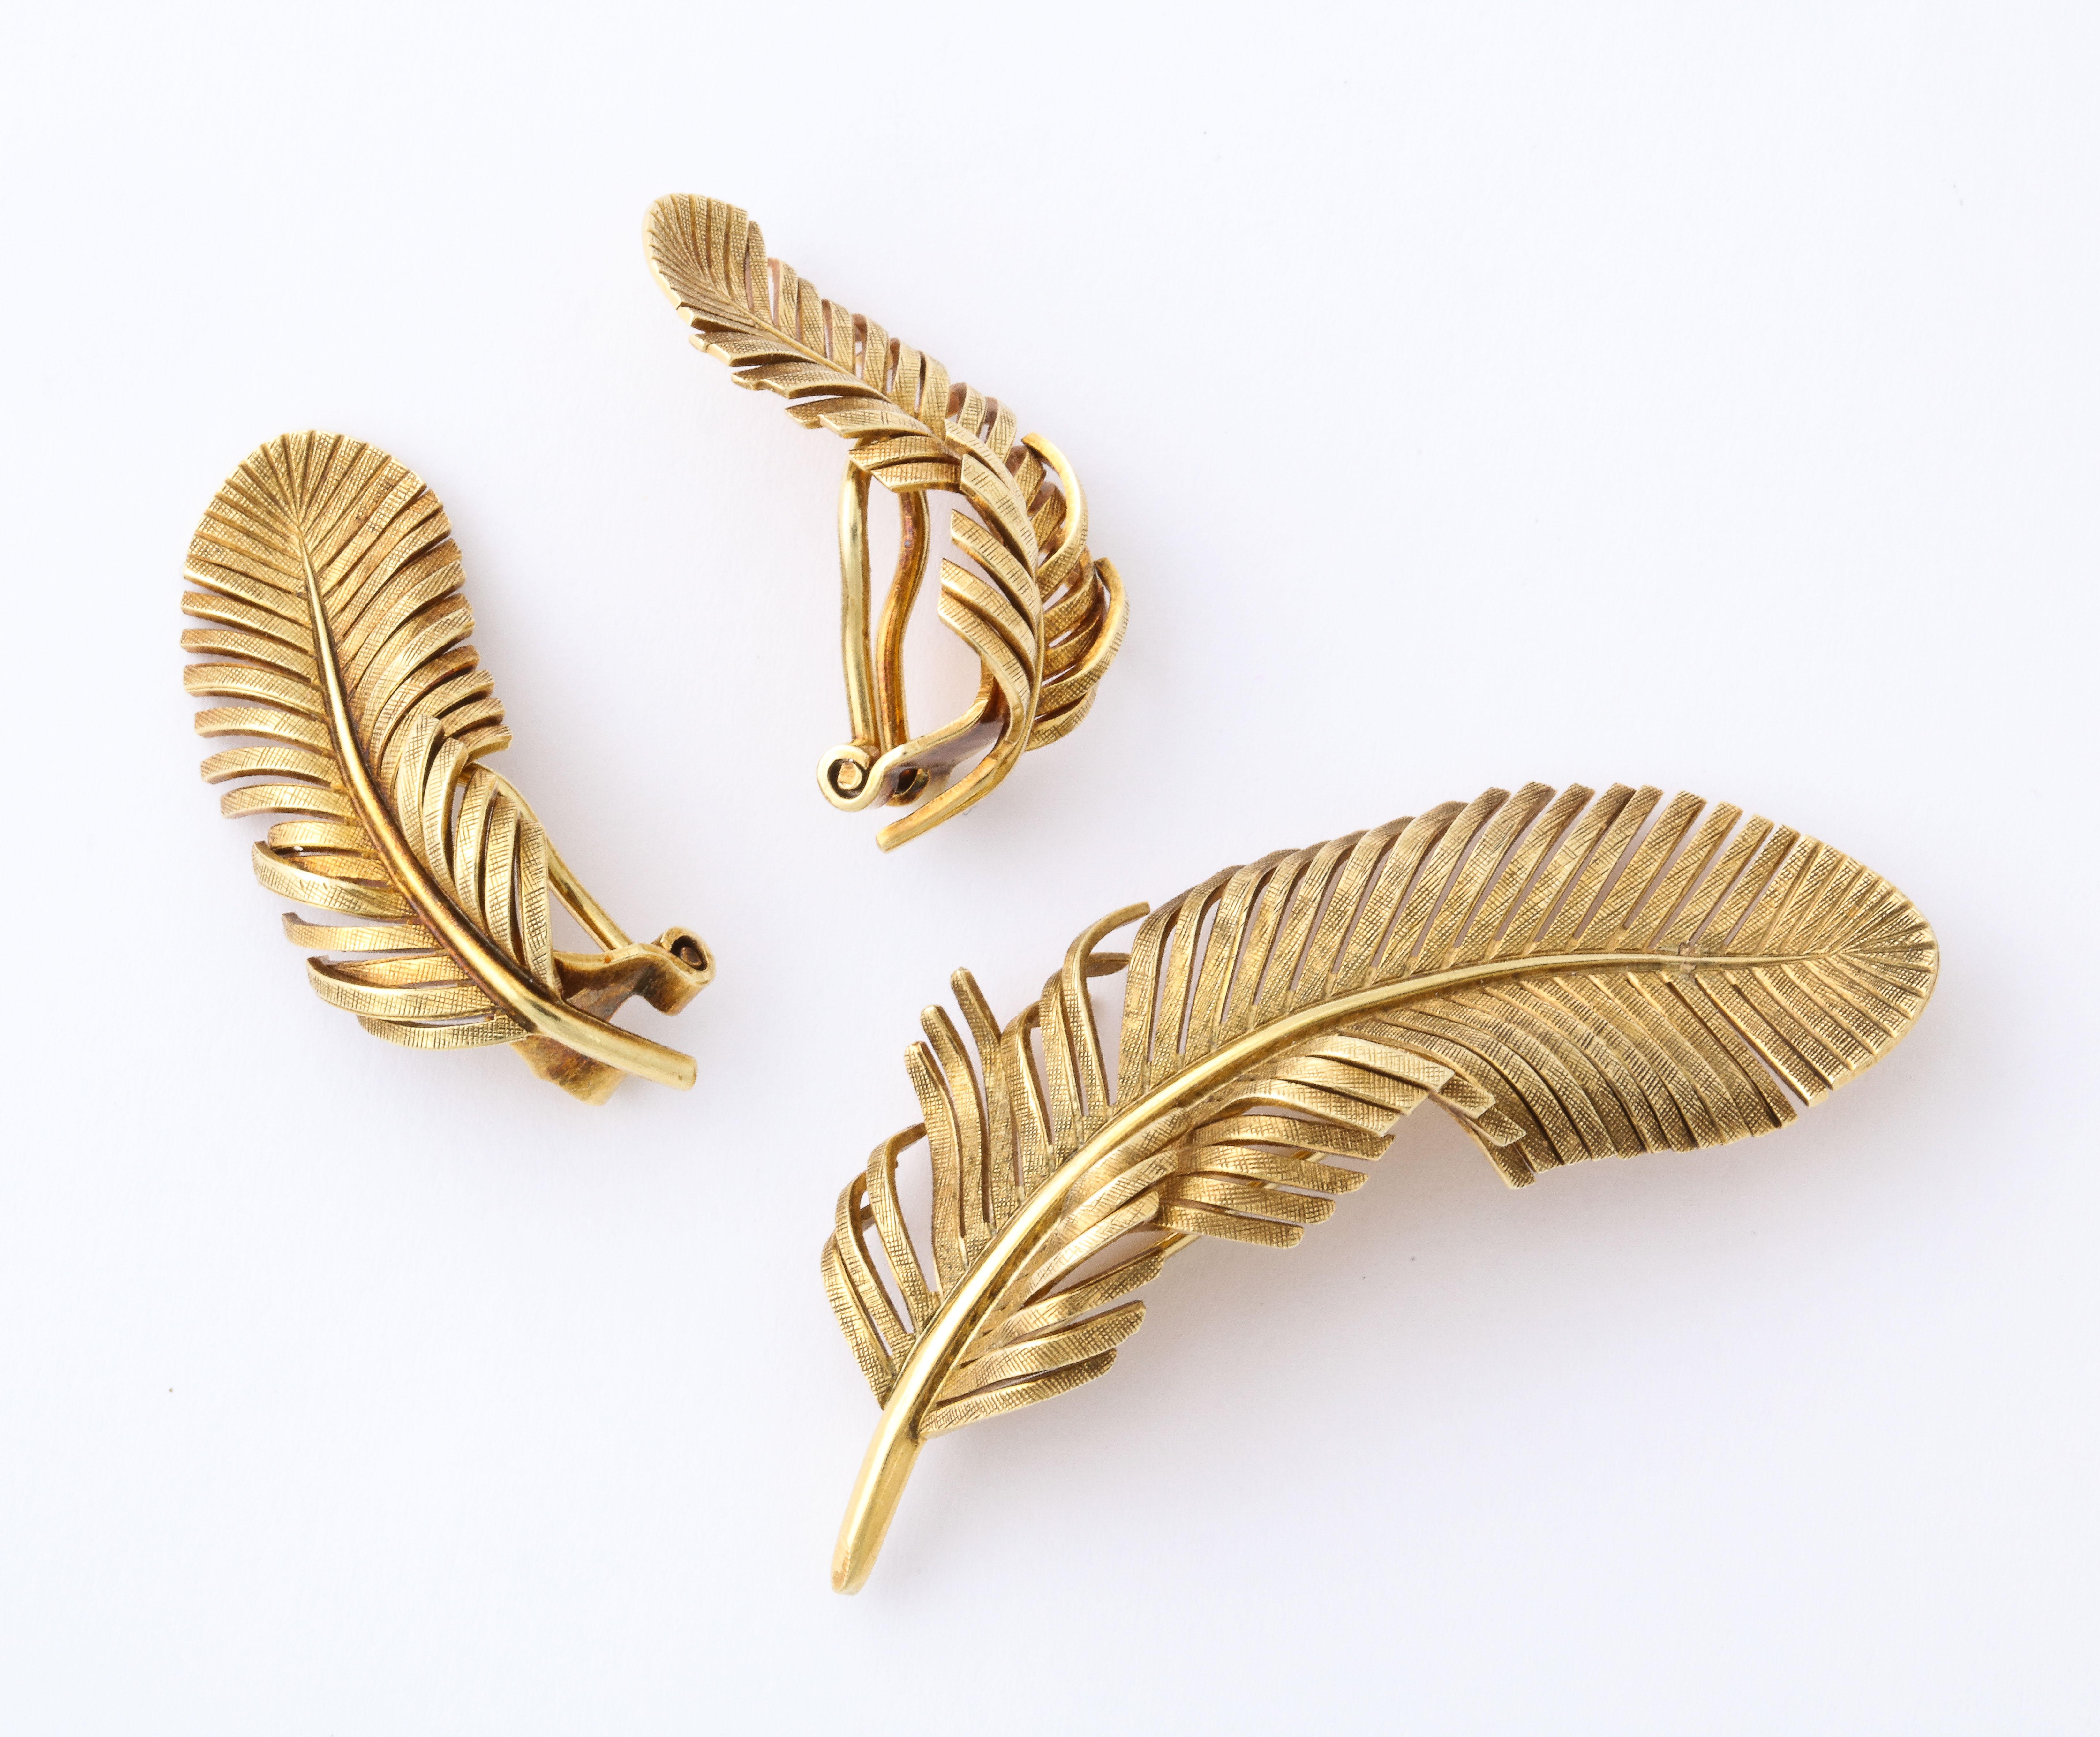 Vintage 1960s Tiffany Co. - Germany hand crafted ear clips and brooch as fancy feathers of 14K gold. Brooch measures 3/4 inch x 2 inches; ear clips 1/2 inch x 1 1/4 inches. Total weight 15.70 grams. Gold mark and Tiffany Co. - Germany.